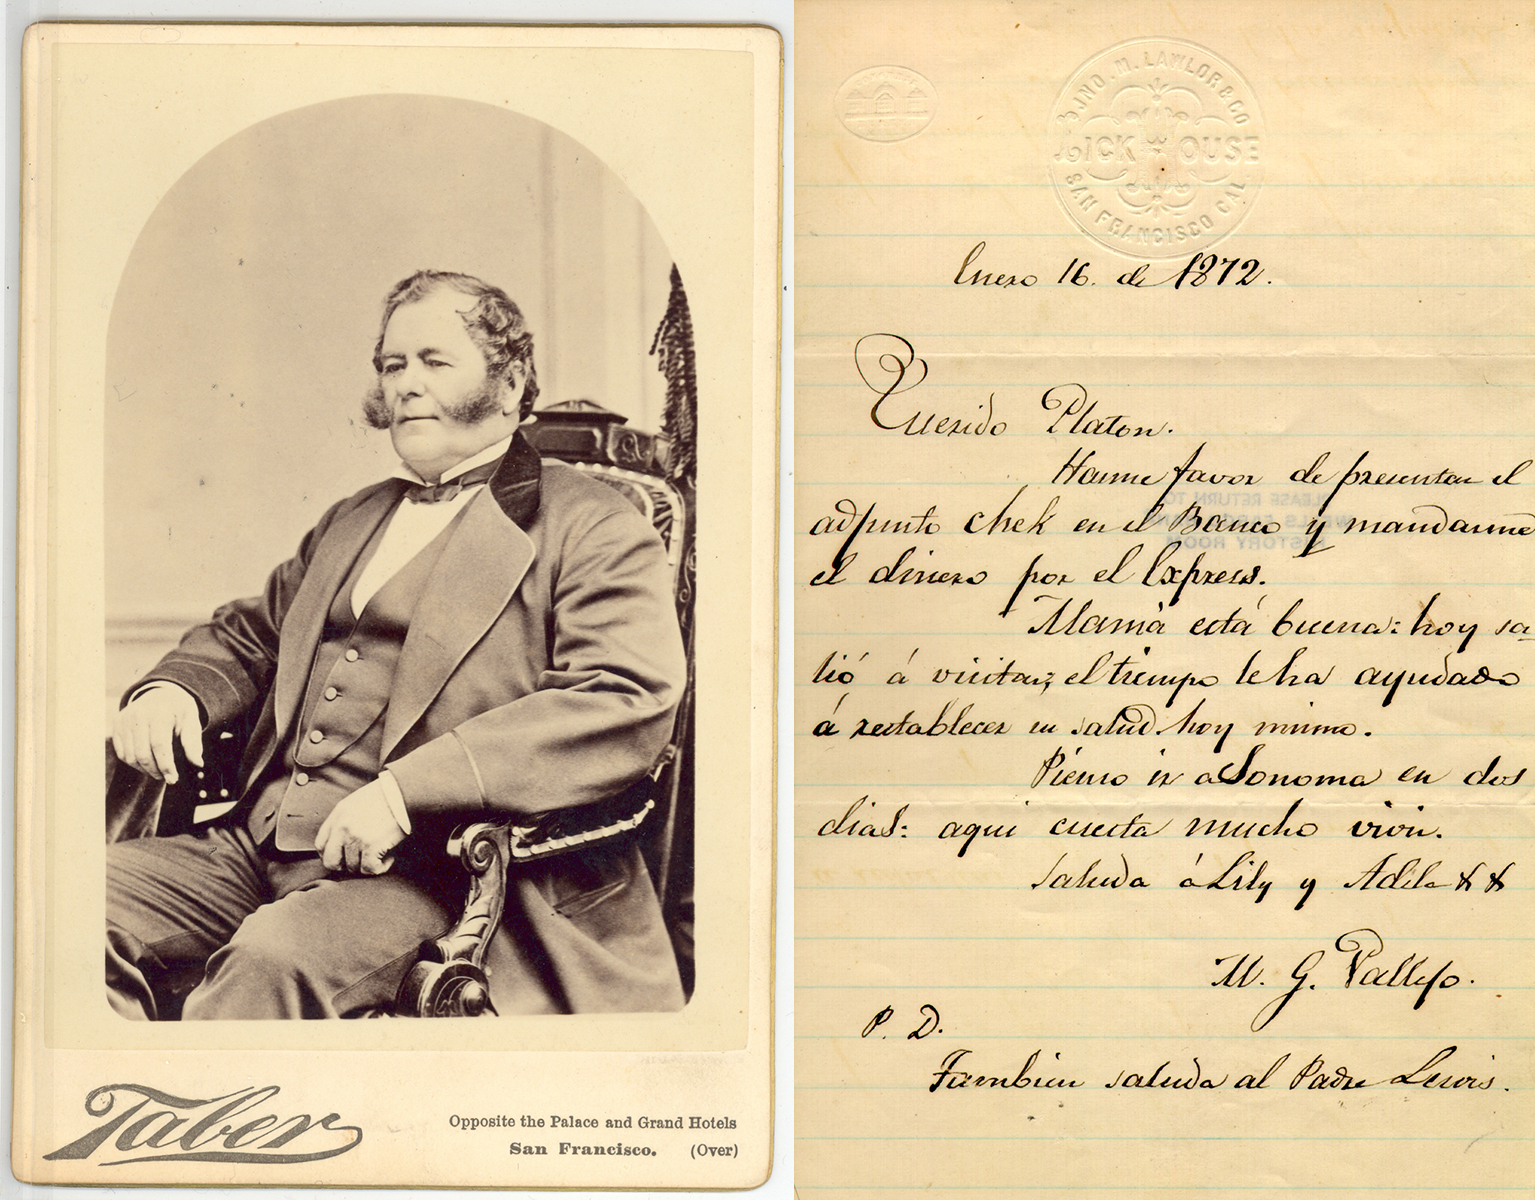 Black-and-white image of Gen. Mariano Vallejo wearing a suit and sitting in a chair. It is next to a handwritten letter in Spanish from 1872. Image link will enlarge image.